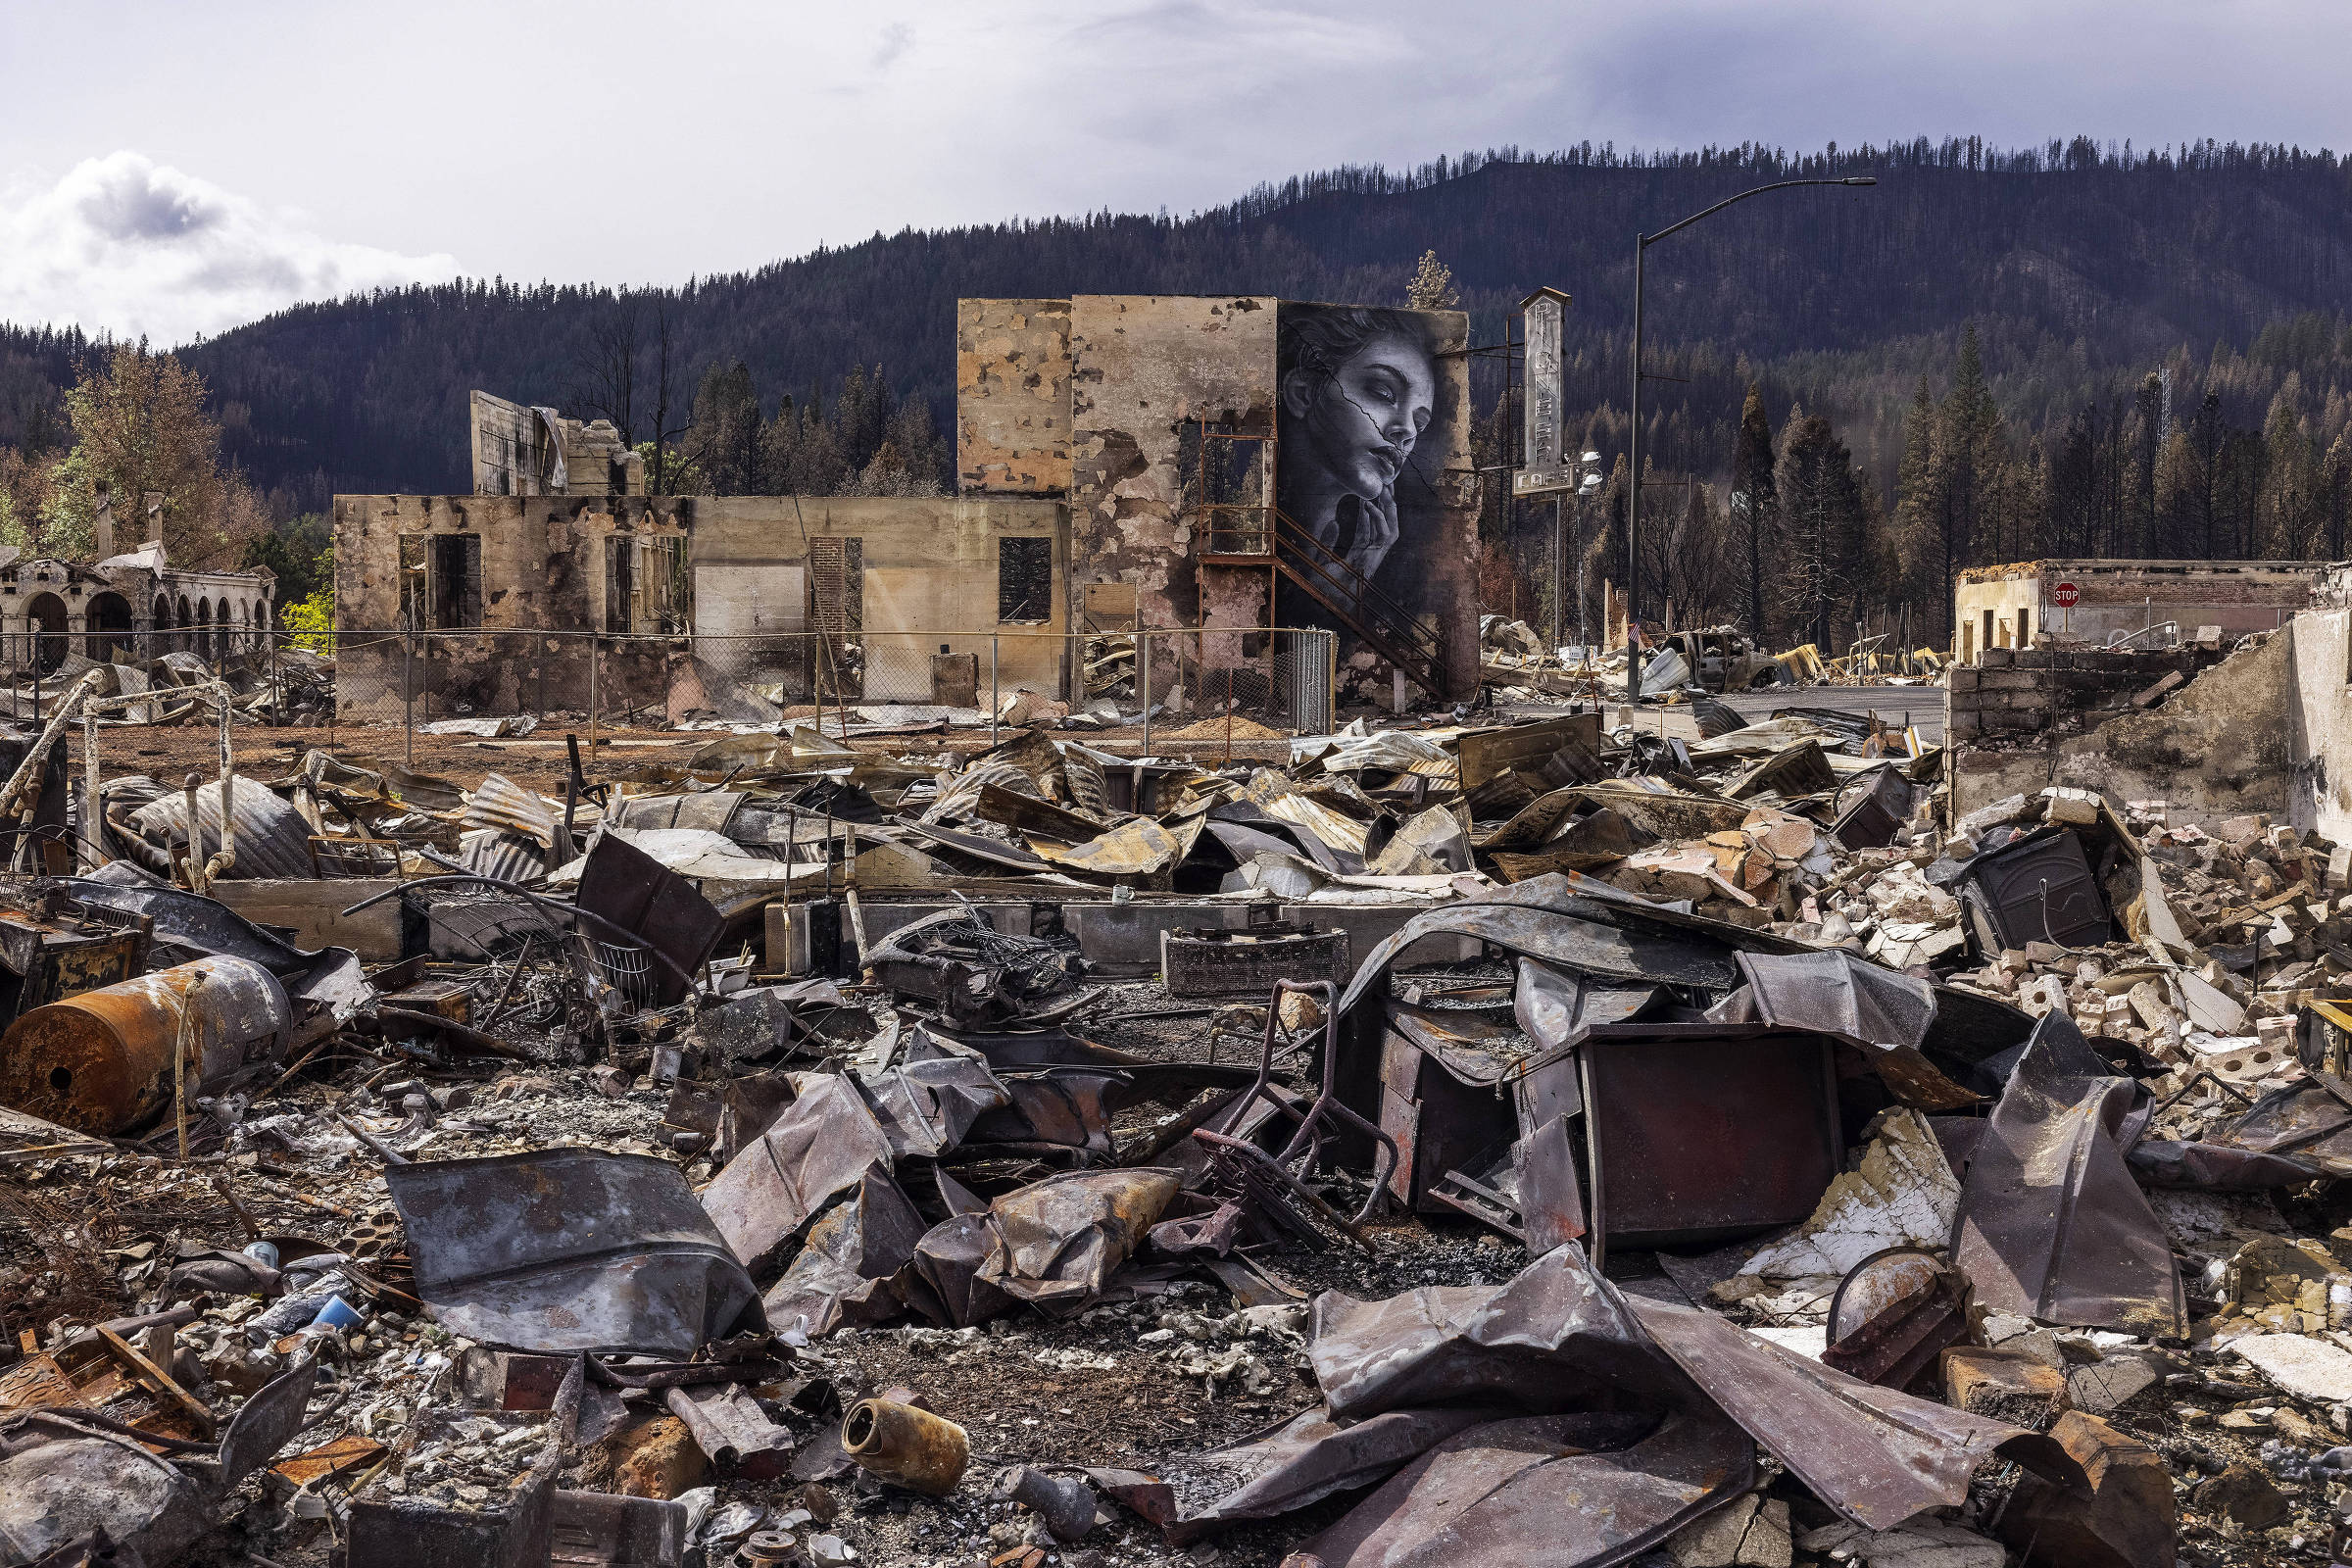 Debris from homes and buildings in the northern California town of Greenville, which was destroyed by the Dixie fire